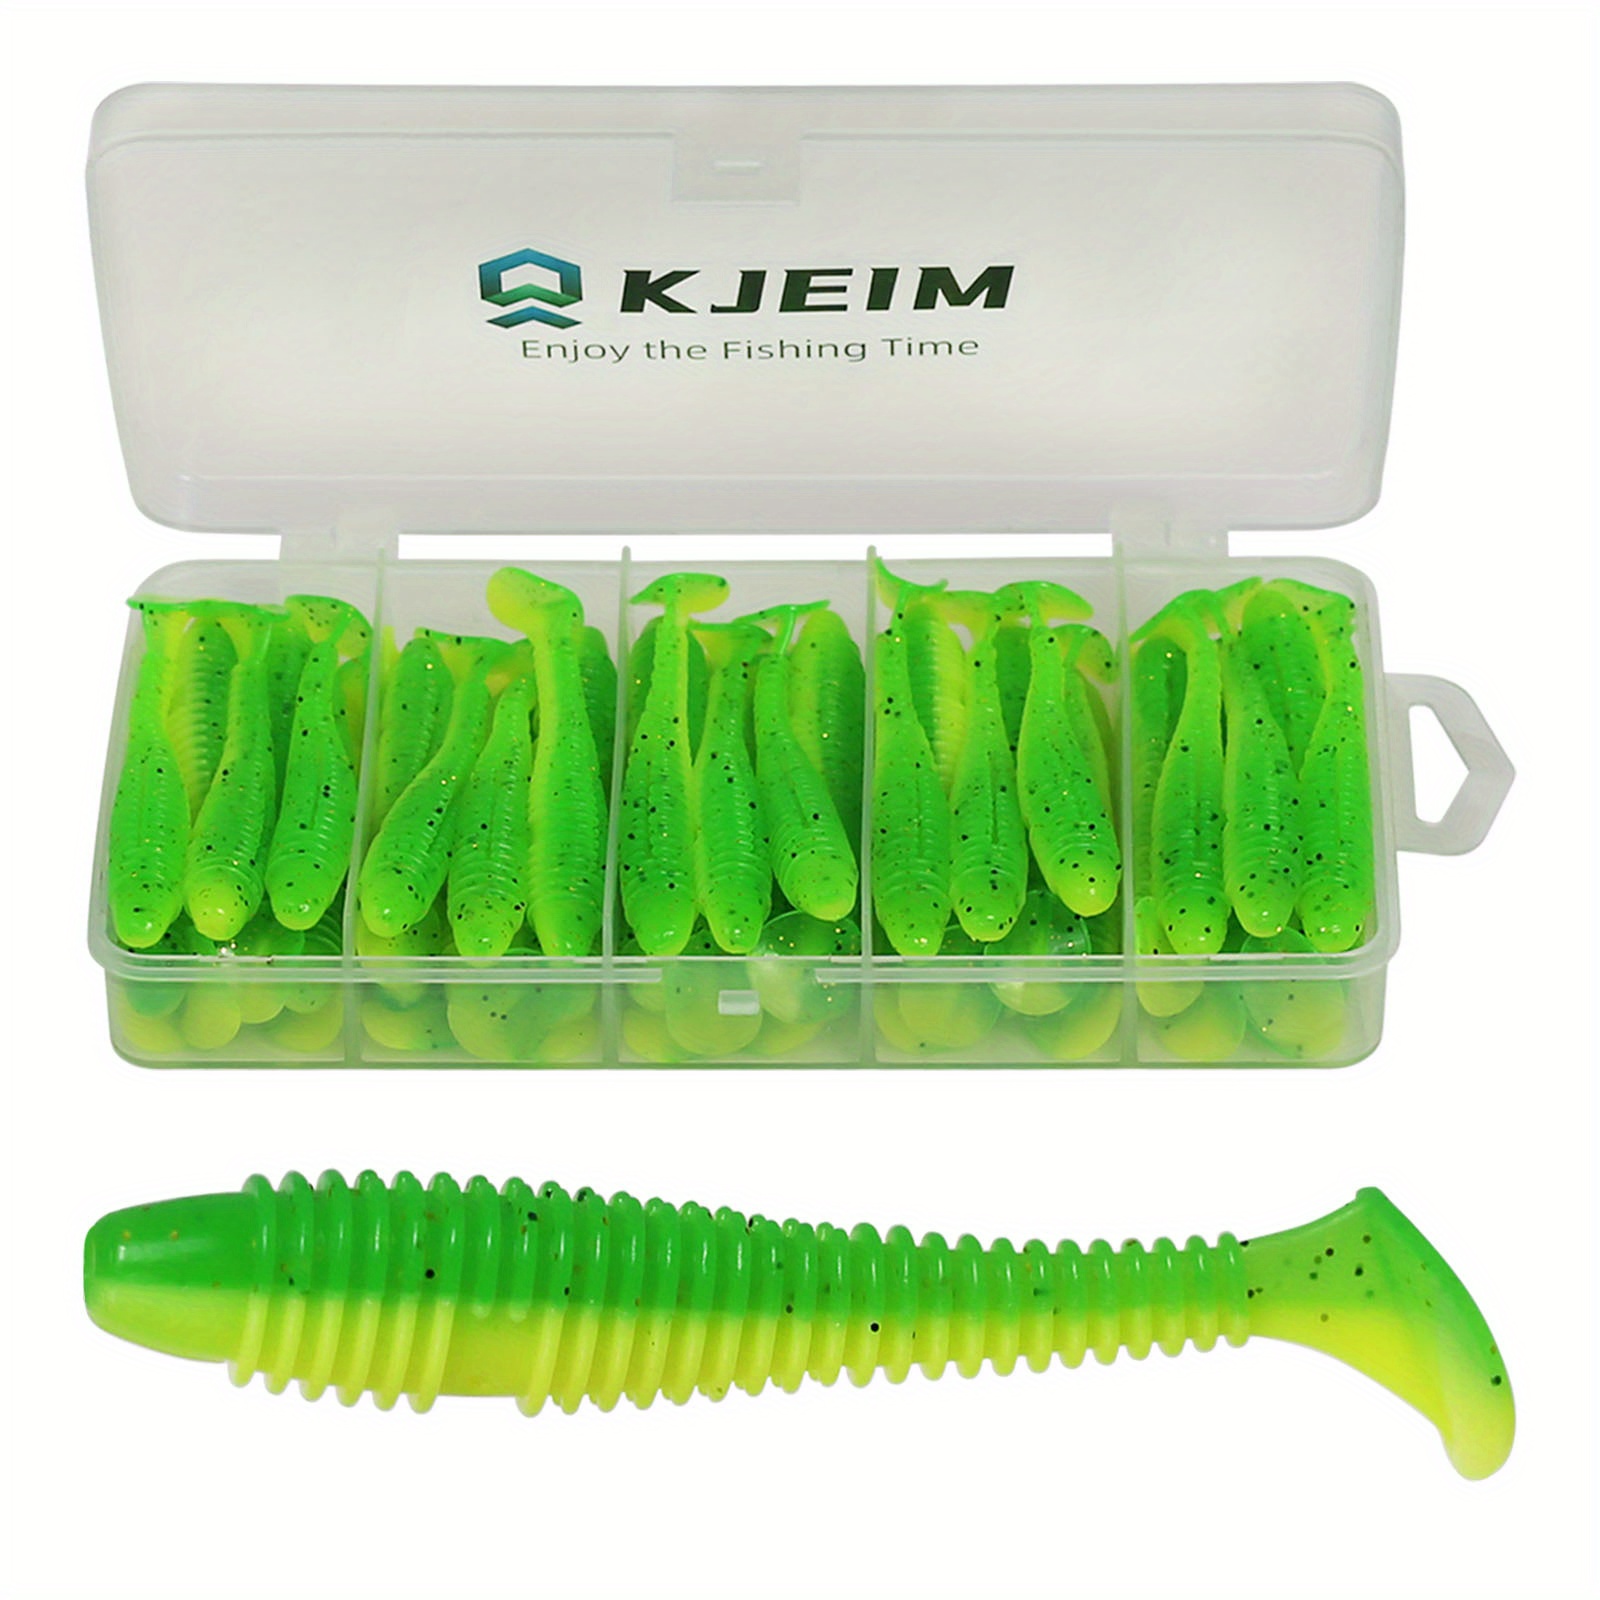 thkfish 30Pcs Paddle Tail Swimbaits 2 INCH Bicolor Soft Plastic Fishing  Lure Swim Baits for Crappie Bass Trout